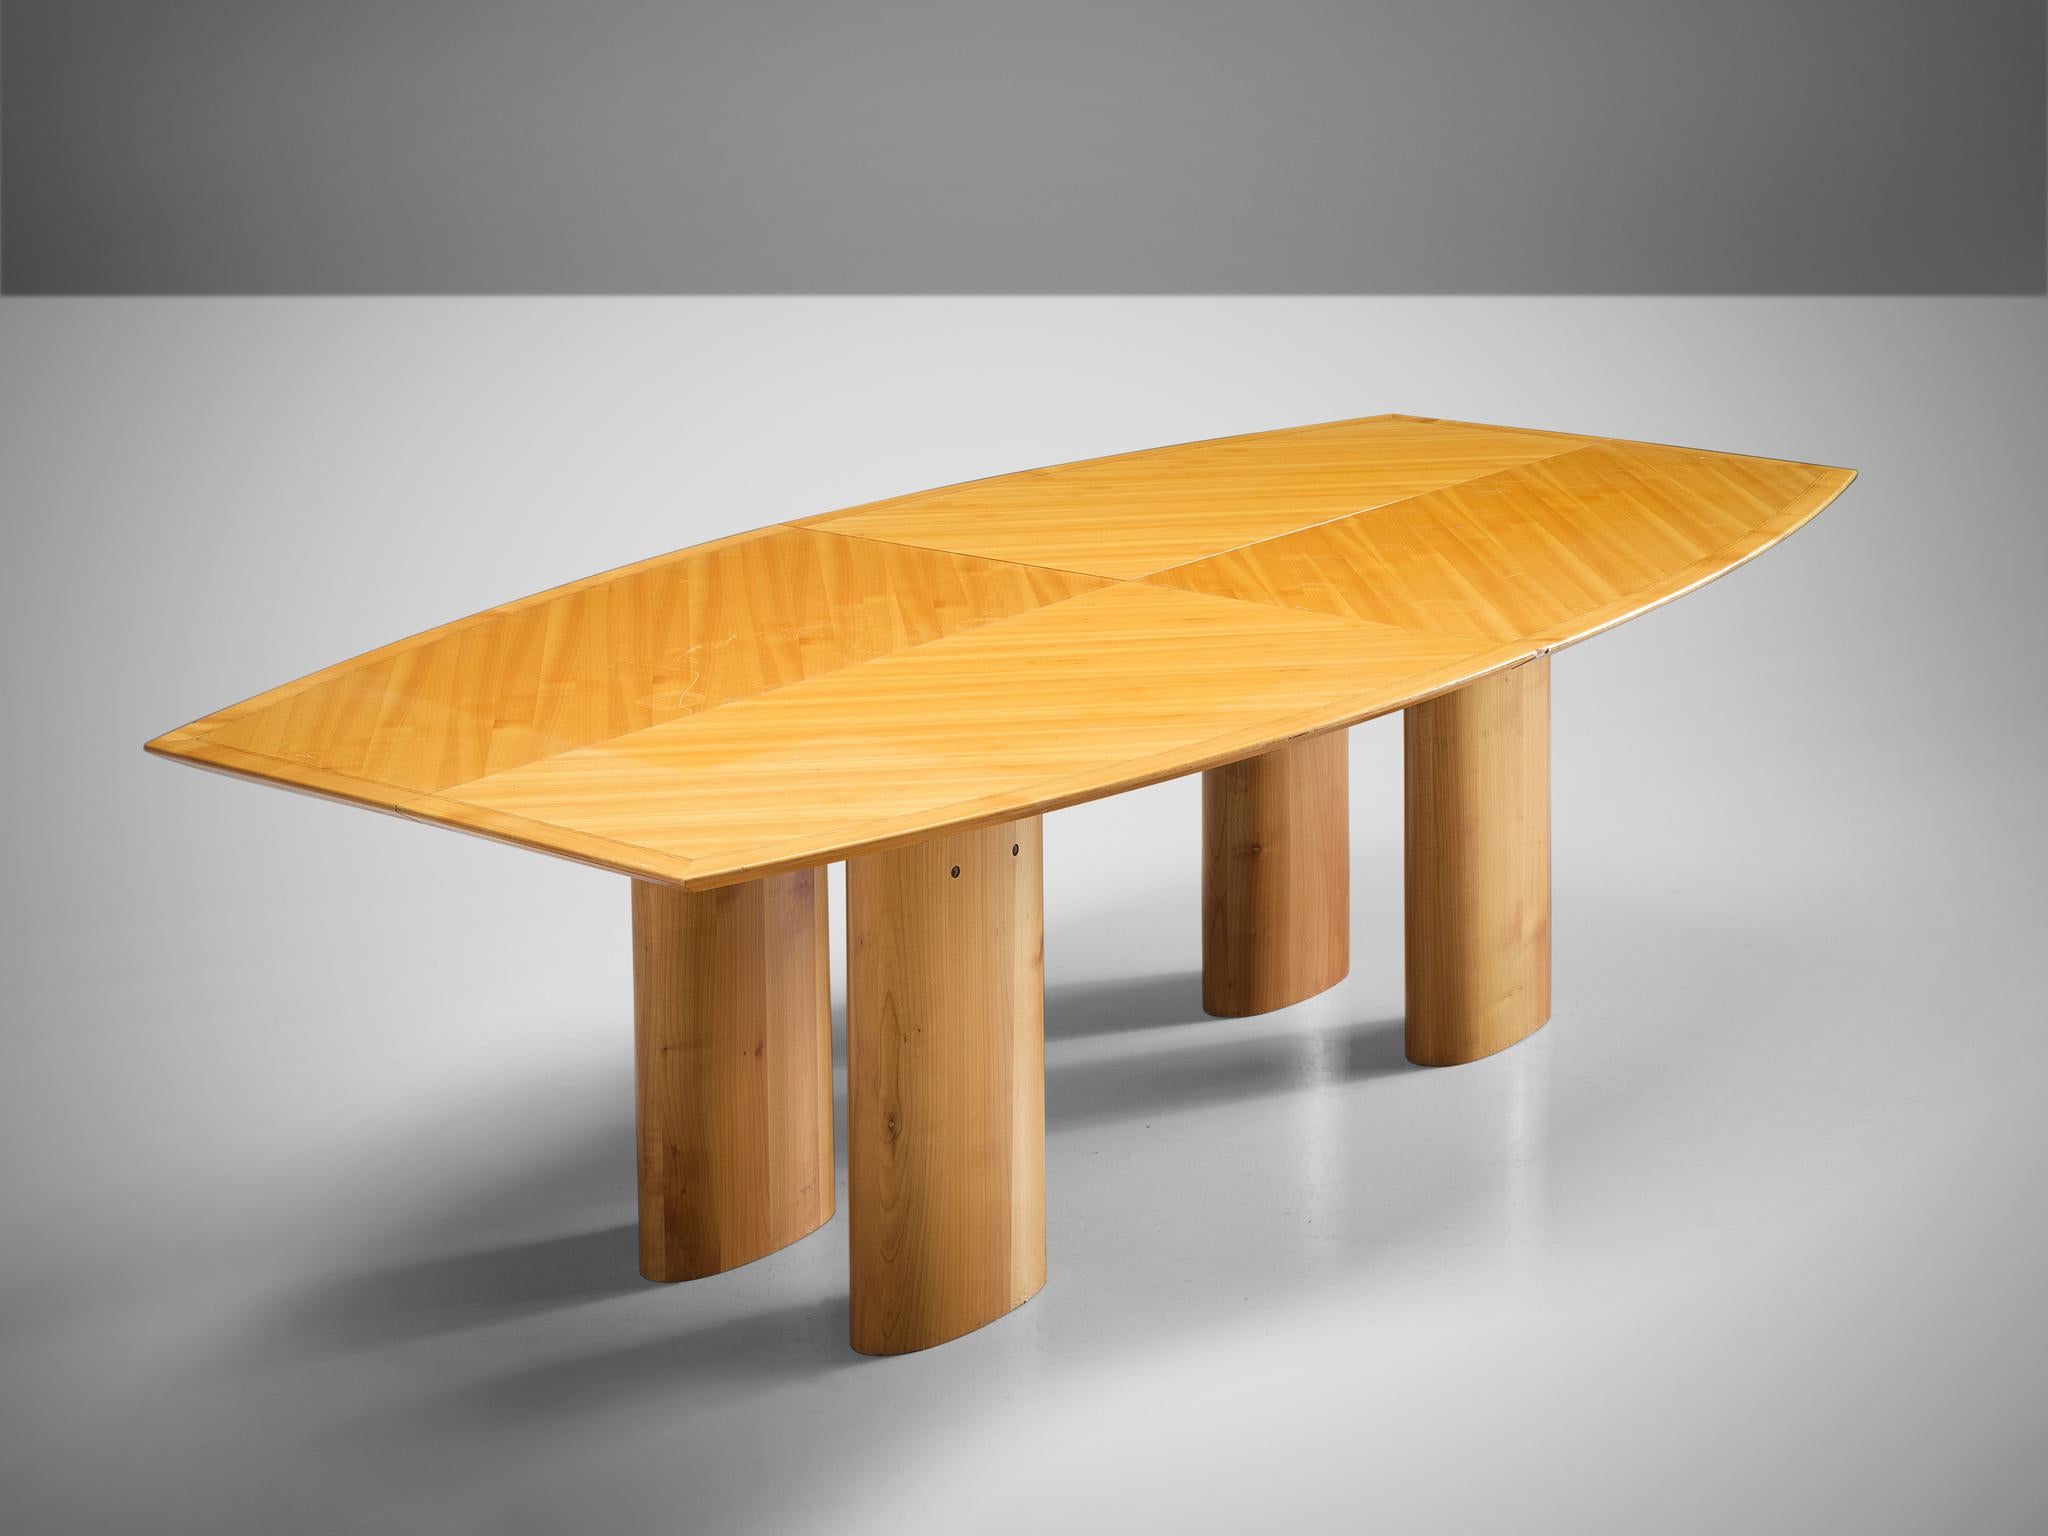 Italian dining table, beech, Italy, 1970s

This sculptural table not only features four oval legs but also a boat shaped top. The top is highlighted with beautiful beech grains and actually consists out of two similar parts. The bright and warm